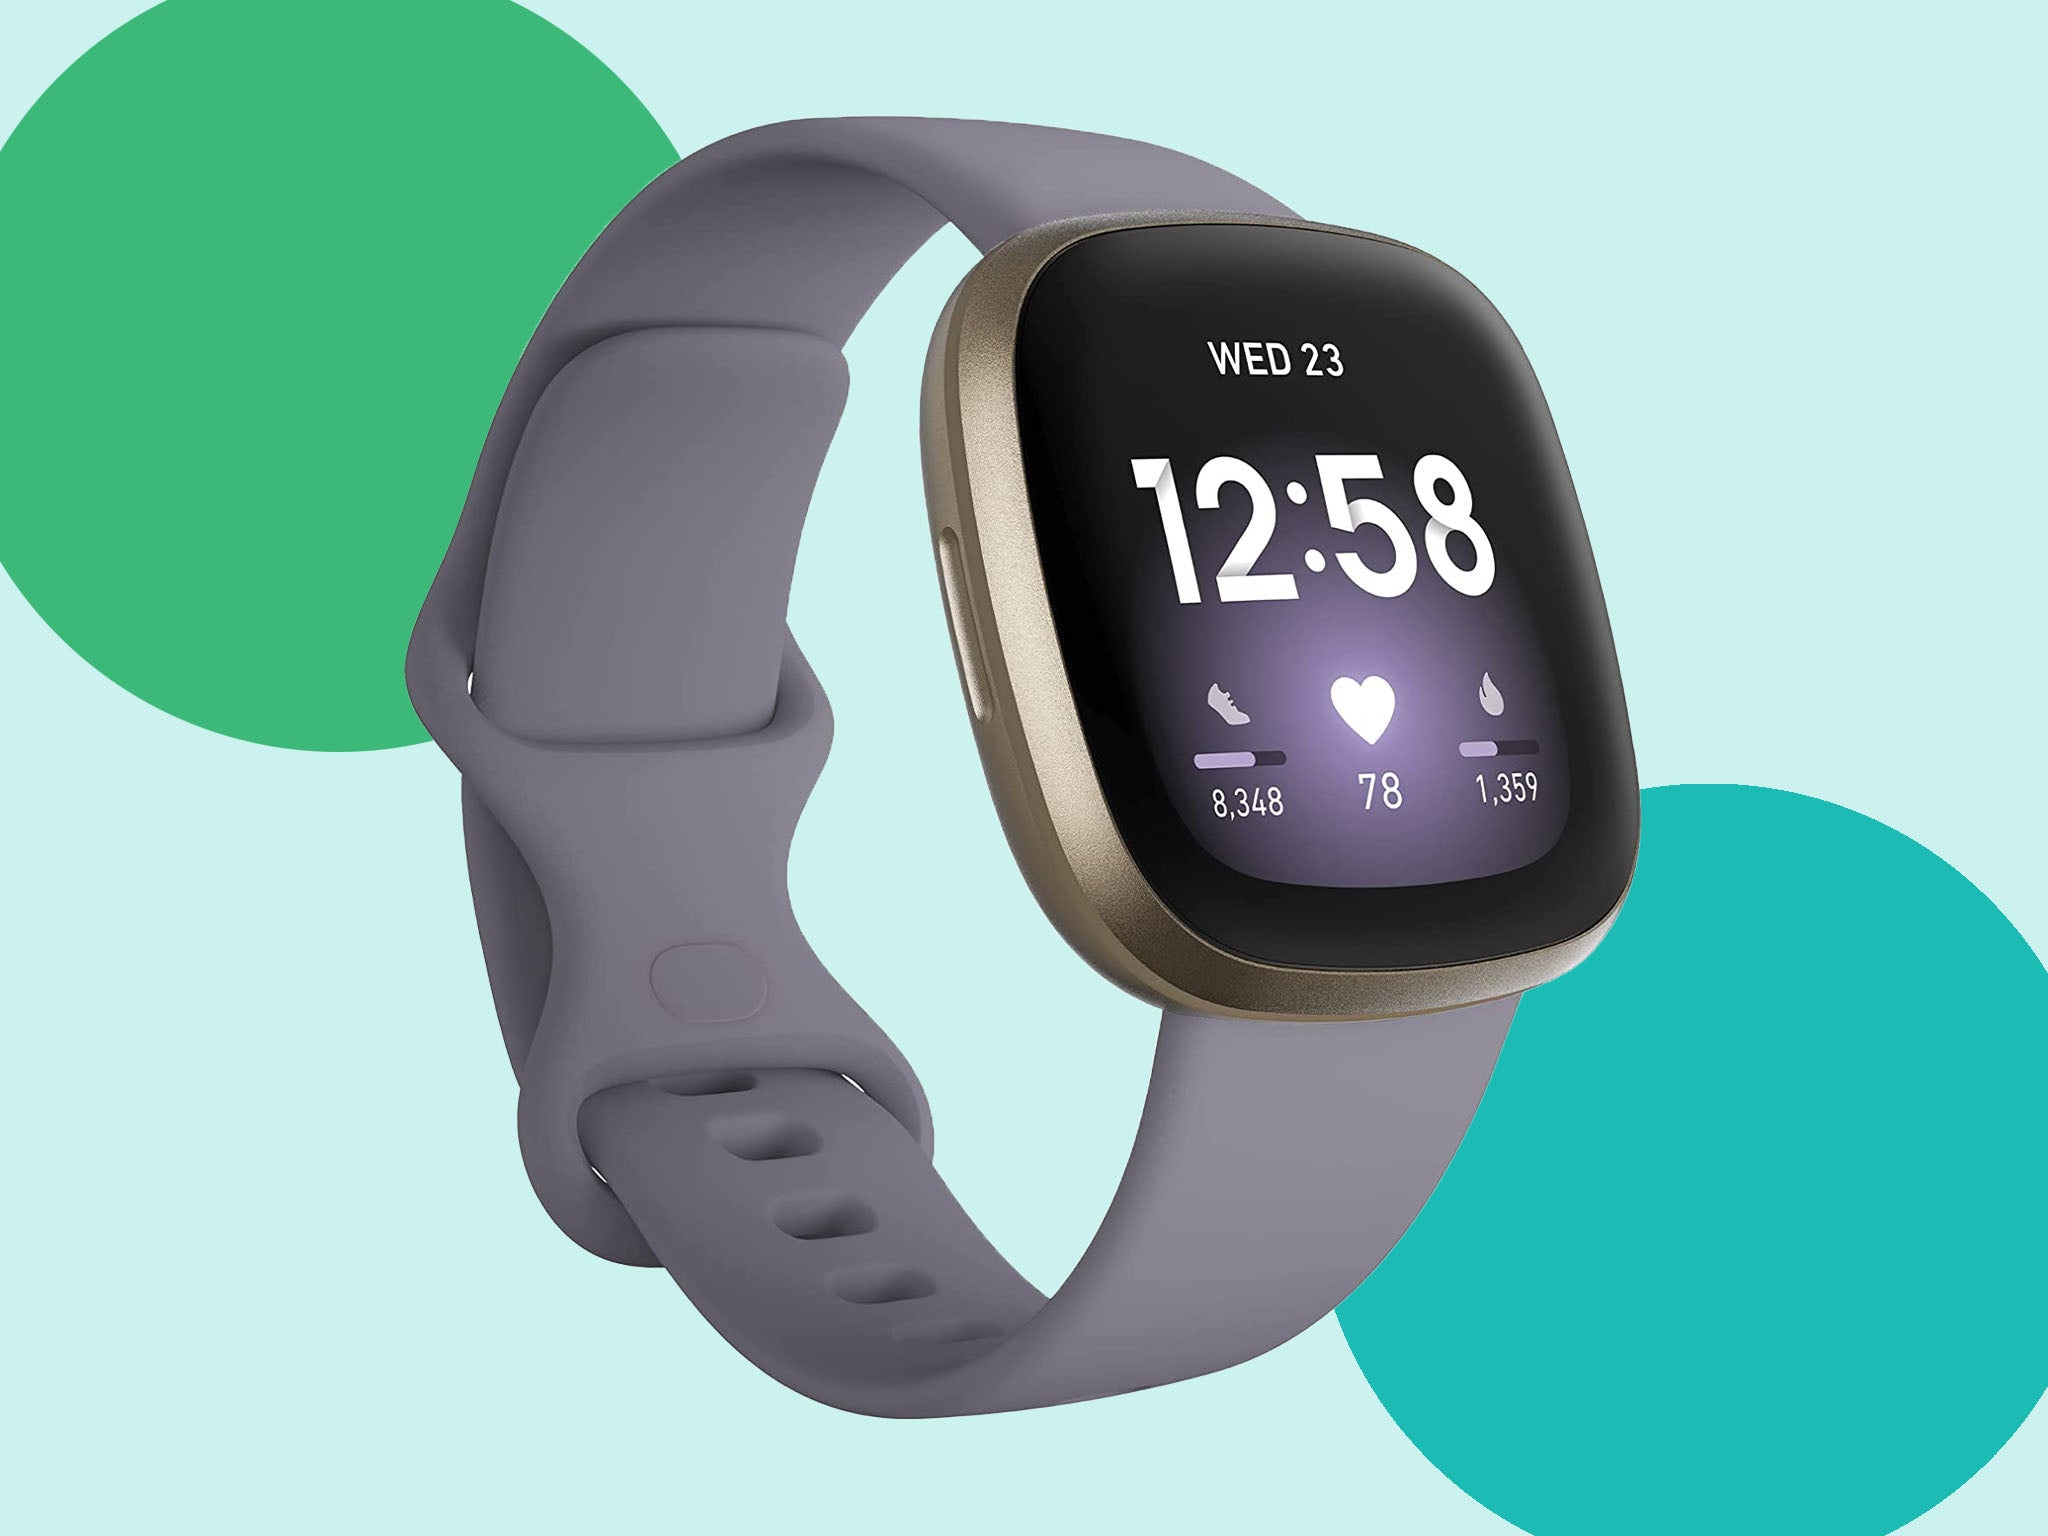 The smartwatch is at its lowest-ever price